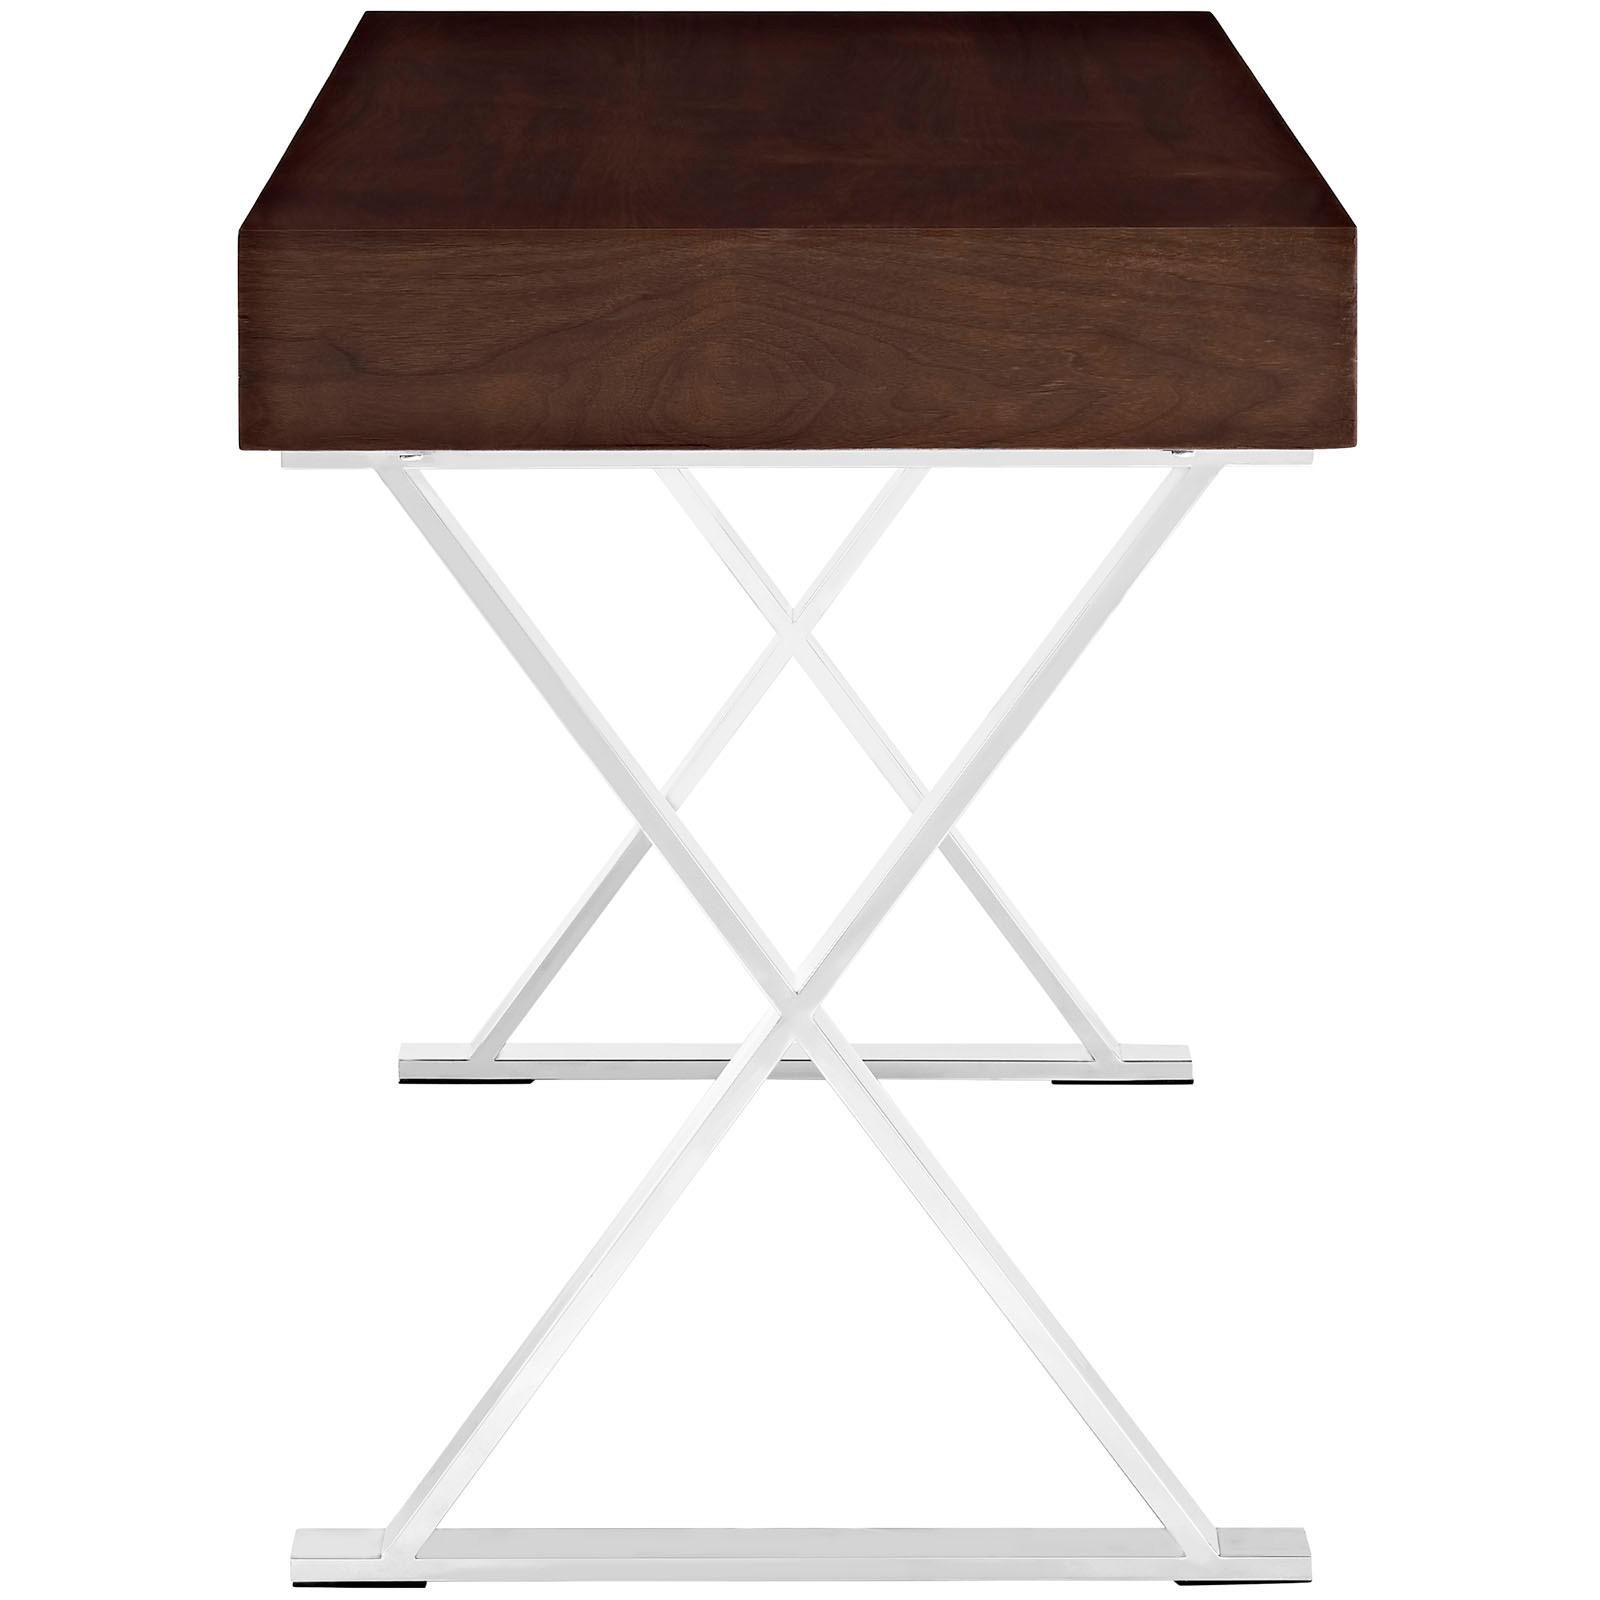 Space saving desk from Modway - Side View - Shown in Walnut (Brown)